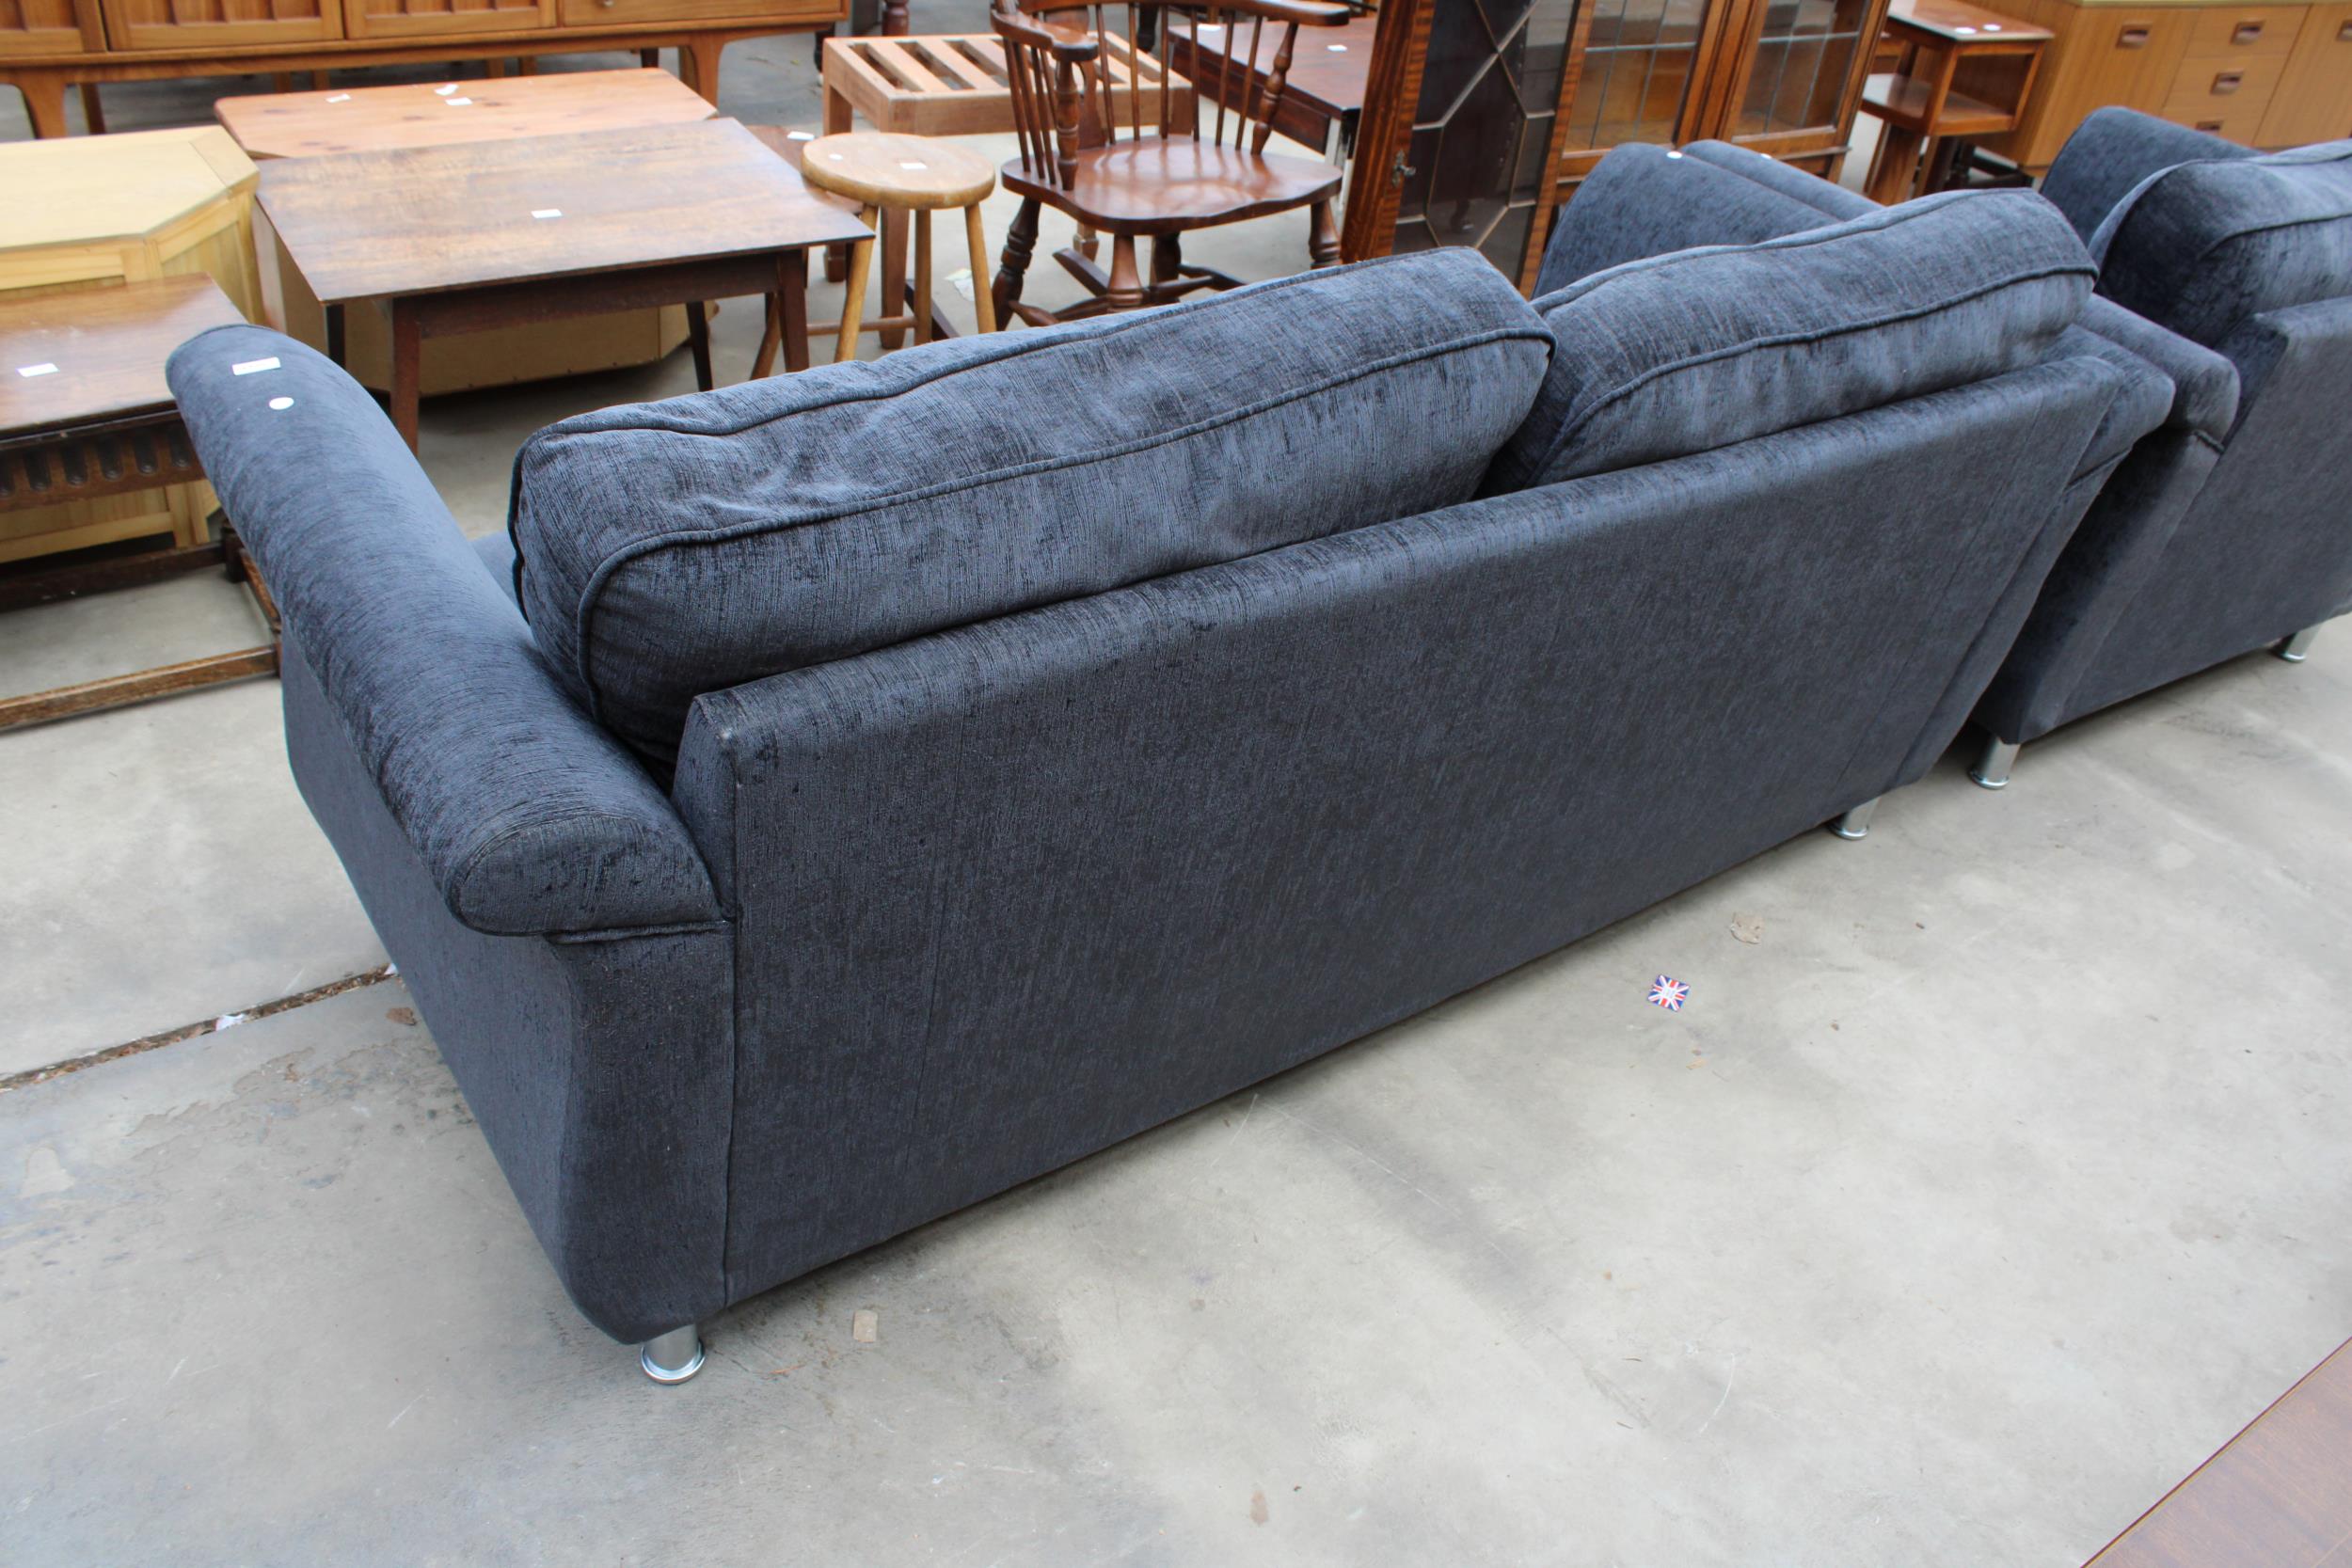 A MODERN SLATE GREY THREE SEATER SETTEE WITH POLISHED CHROME BUTTONED ARMS AND LEGS - Image 3 of 4